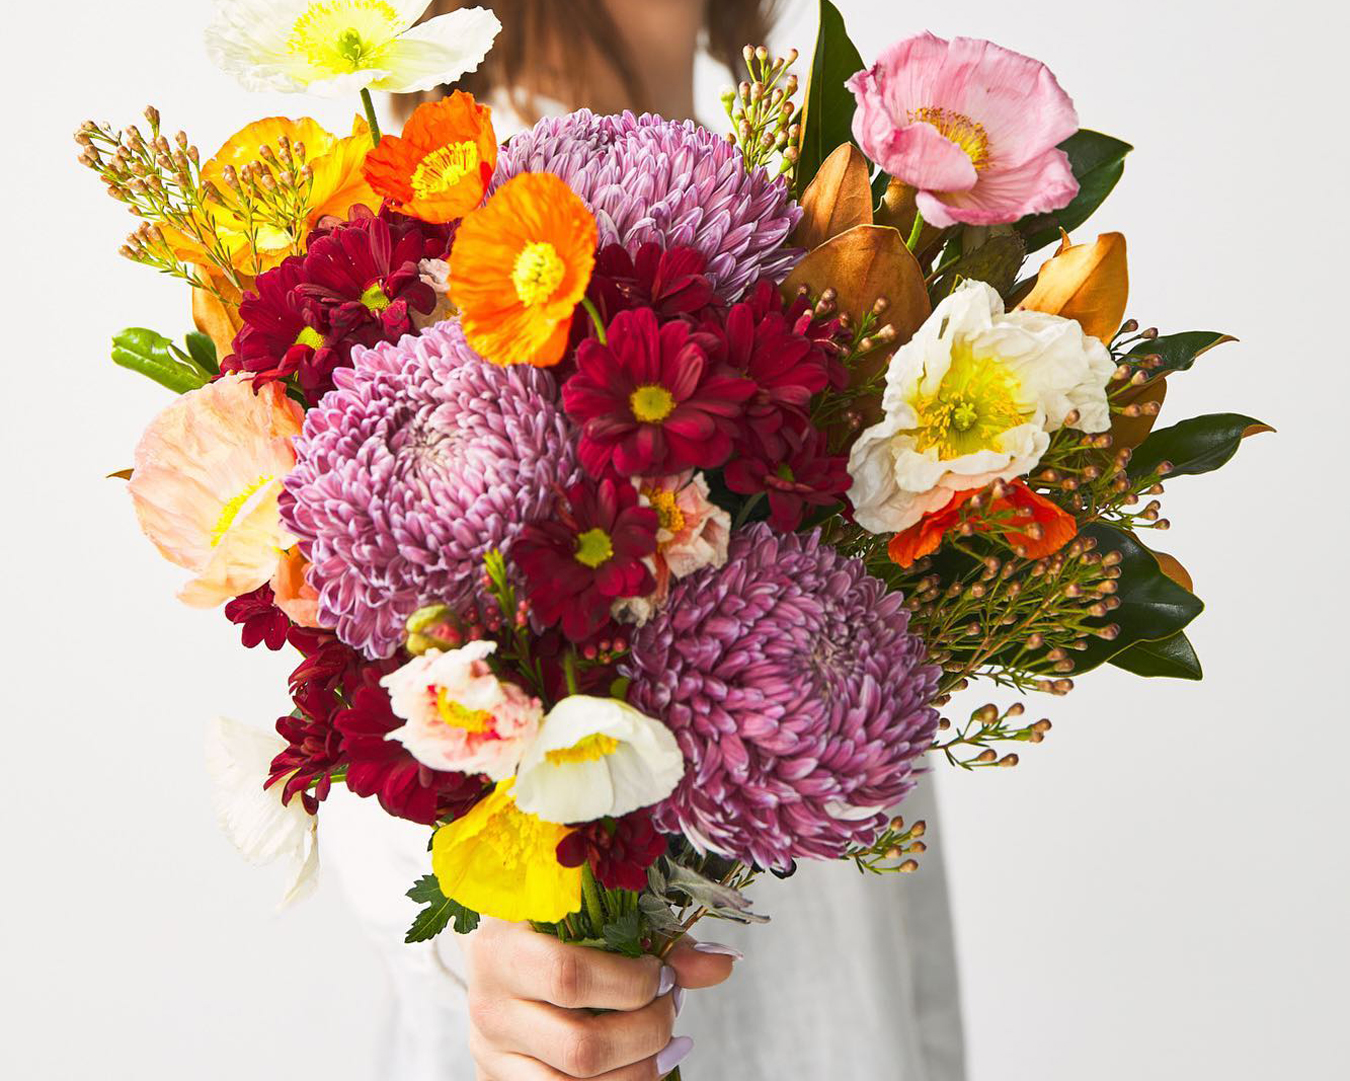 Flower delivery Melbourne can be overwhelming, but these blooms from Floraly have you covered.